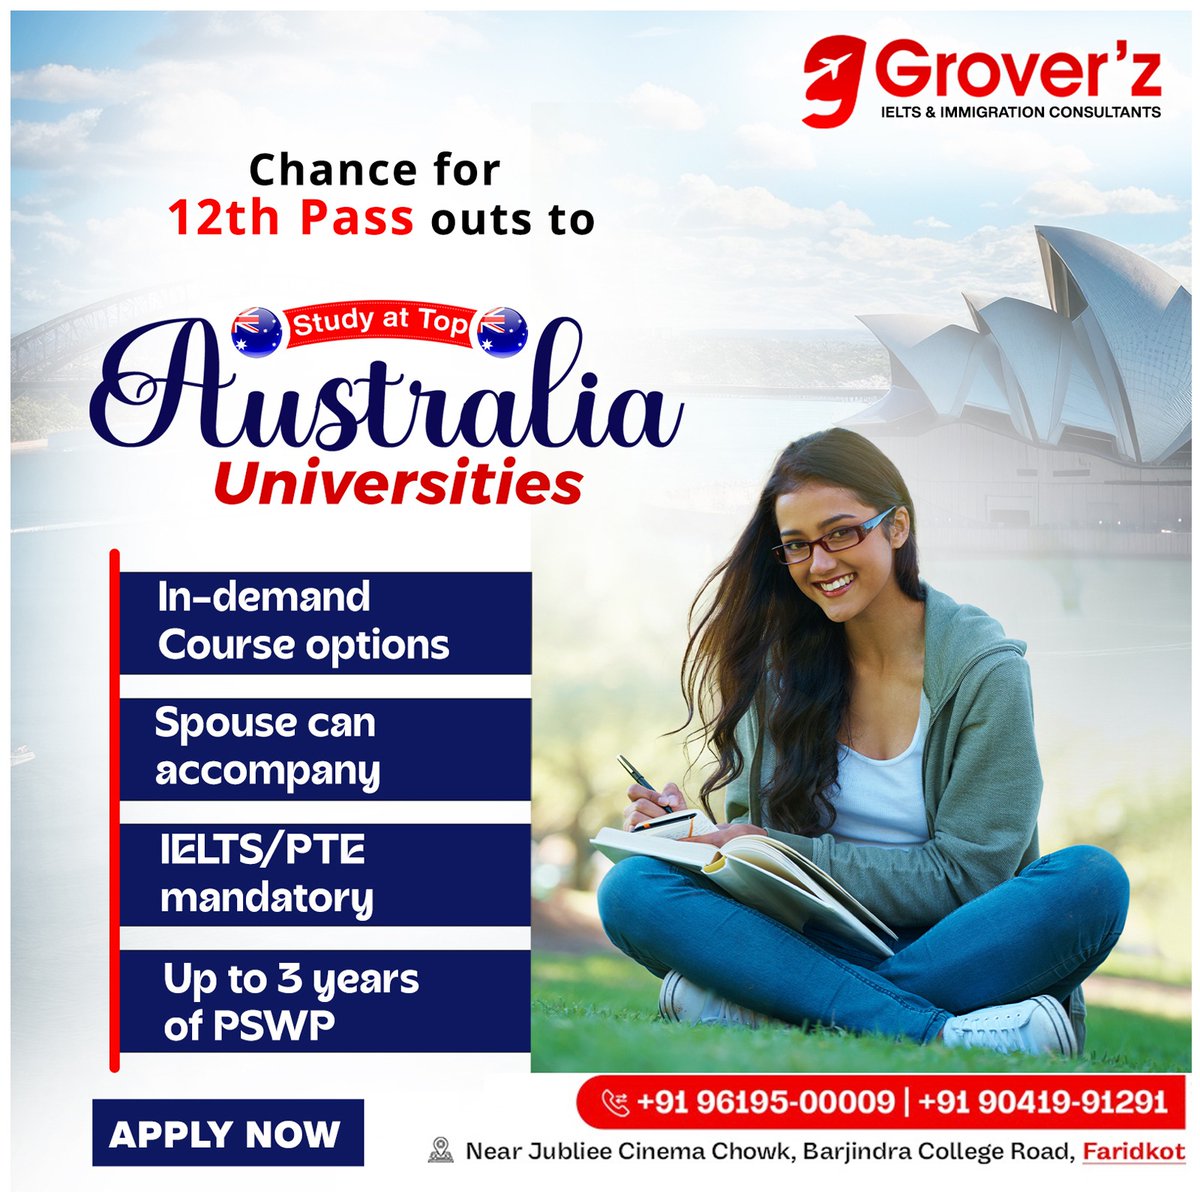 Attention 12th Pass Graduates! 🇦🇺 Study & Live in Australia! Thinking about studying abroad after 12th? Consider top Australian universities! Plus, bring your spouse! ☎️ 09041991291 . . . #GroverzIeltsImmigration #AustralianEducation #StudyWithSpouse